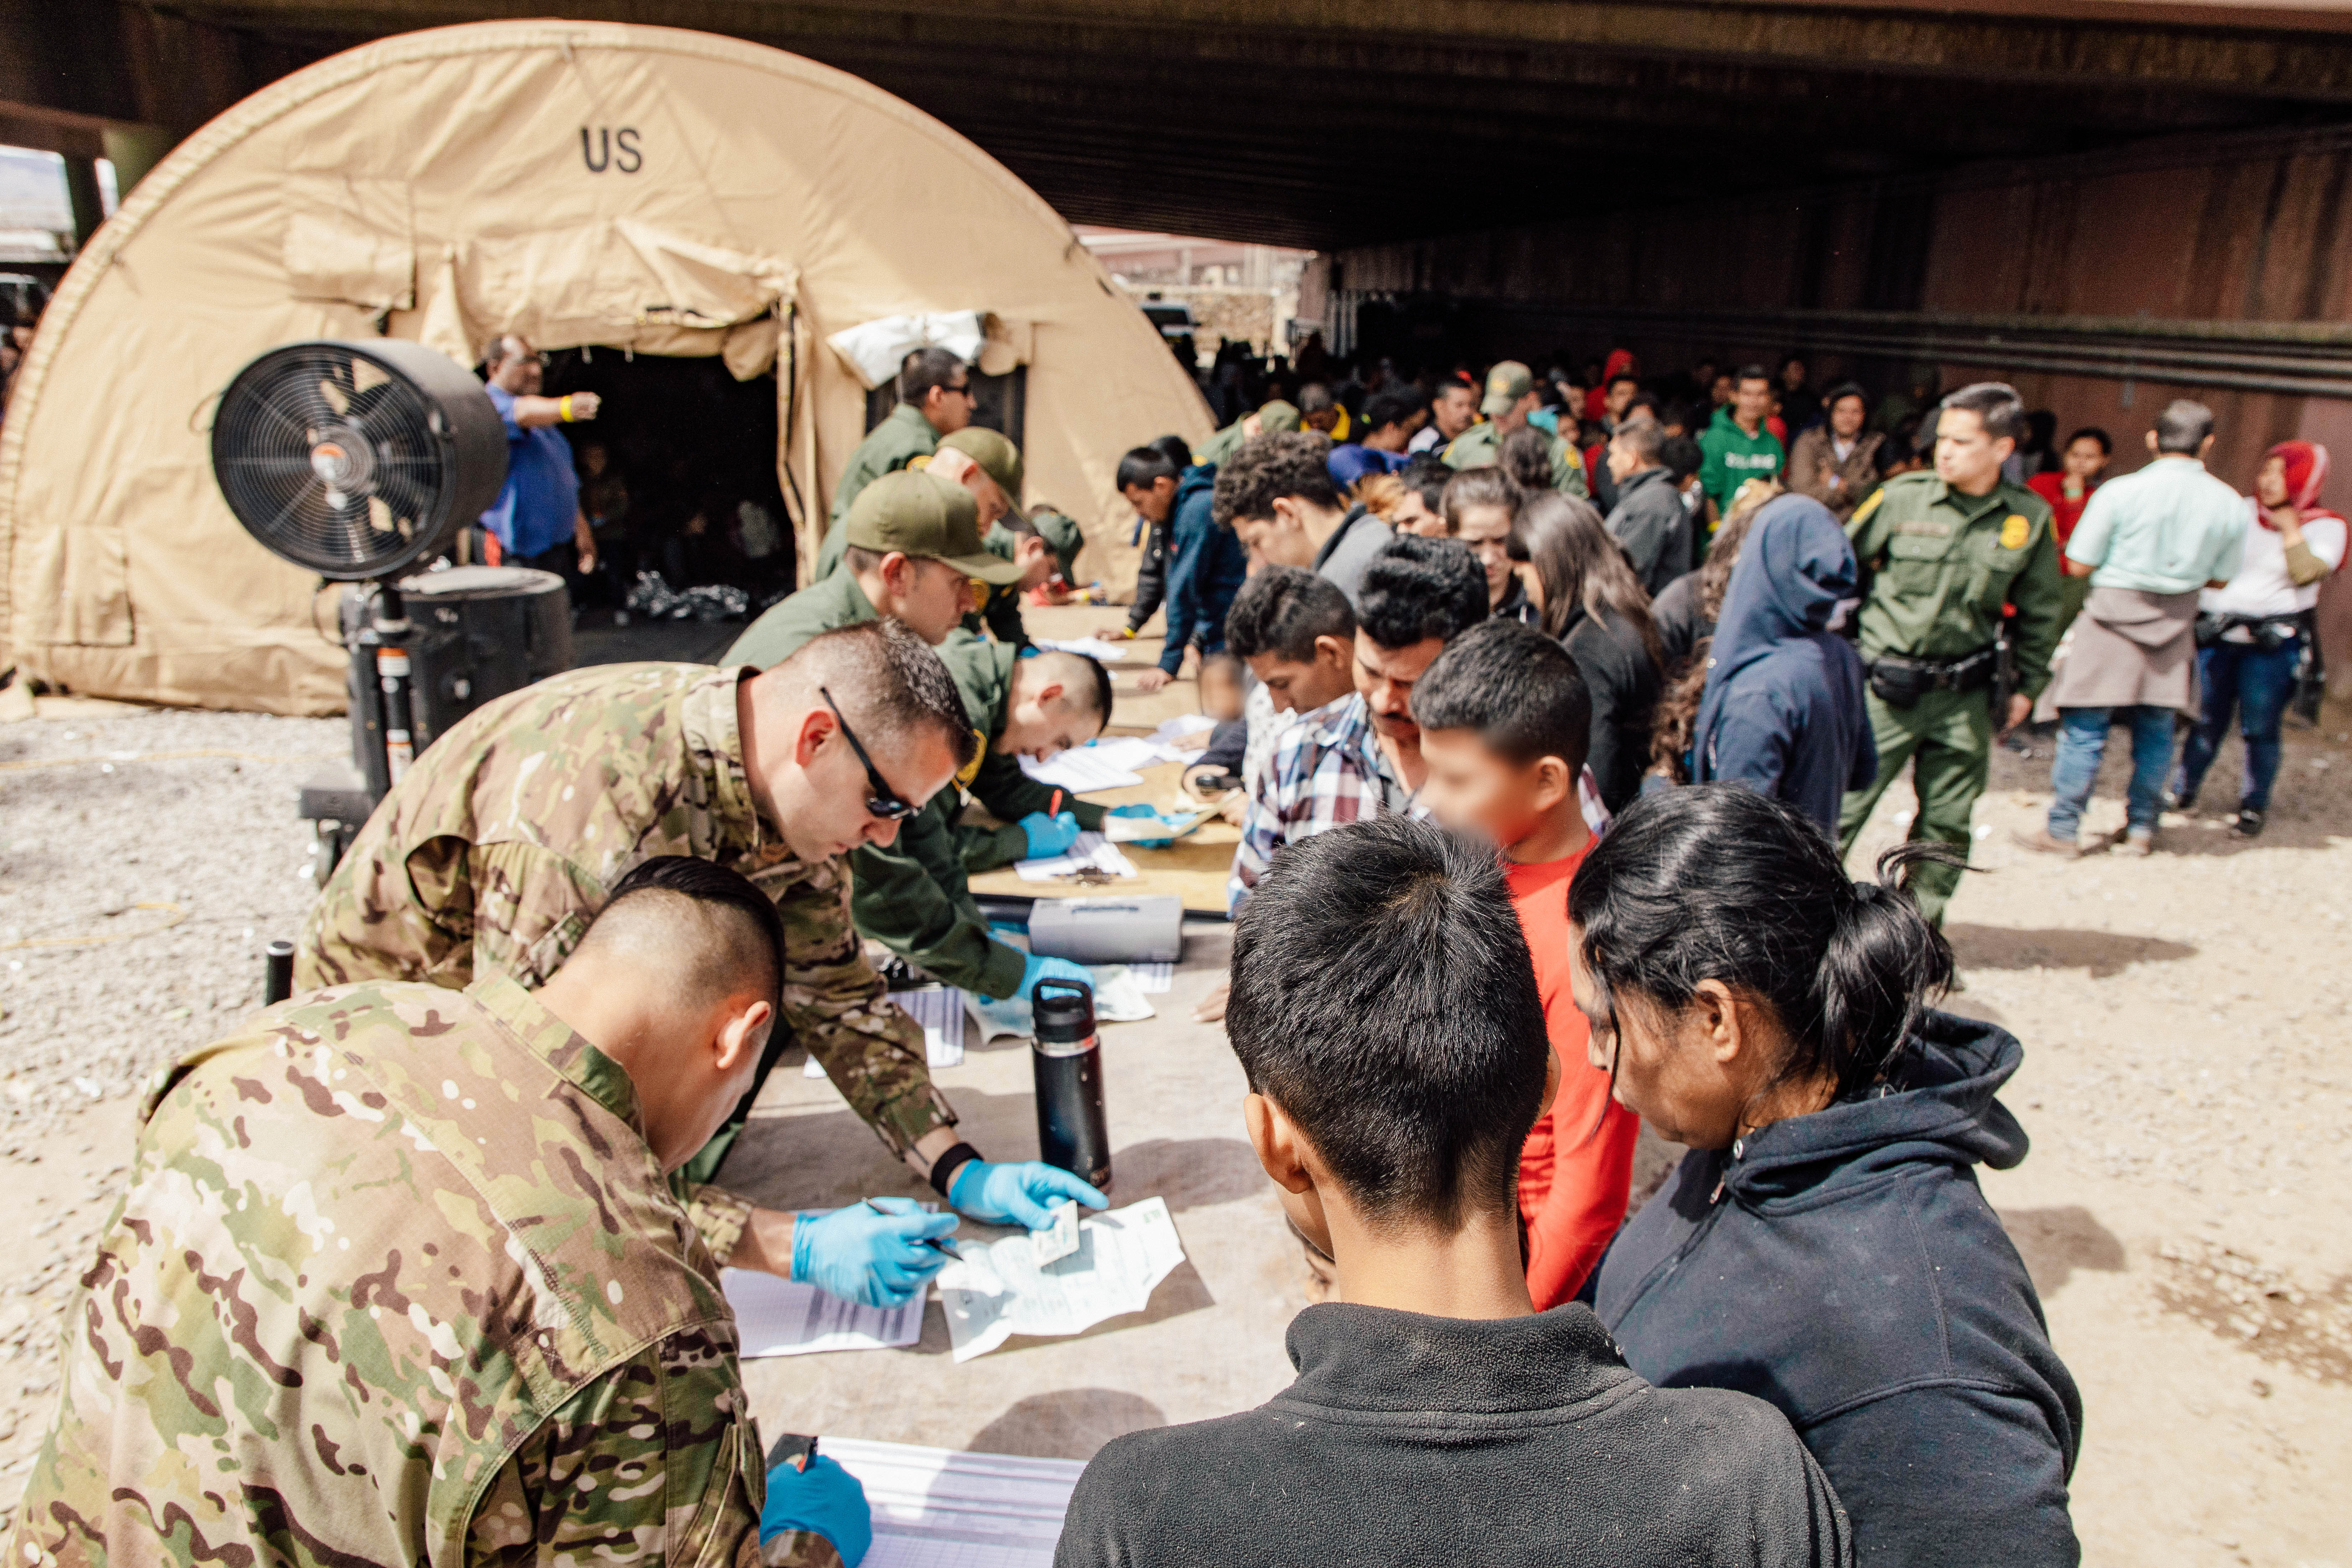 U.S. Border Patrol agents, including members of U.S. Border Patrol's BORSTAR teams (in tactical uniforms) provide food, water, and medical screening to migrants at a processing center in El Paso, Texas on March 22.